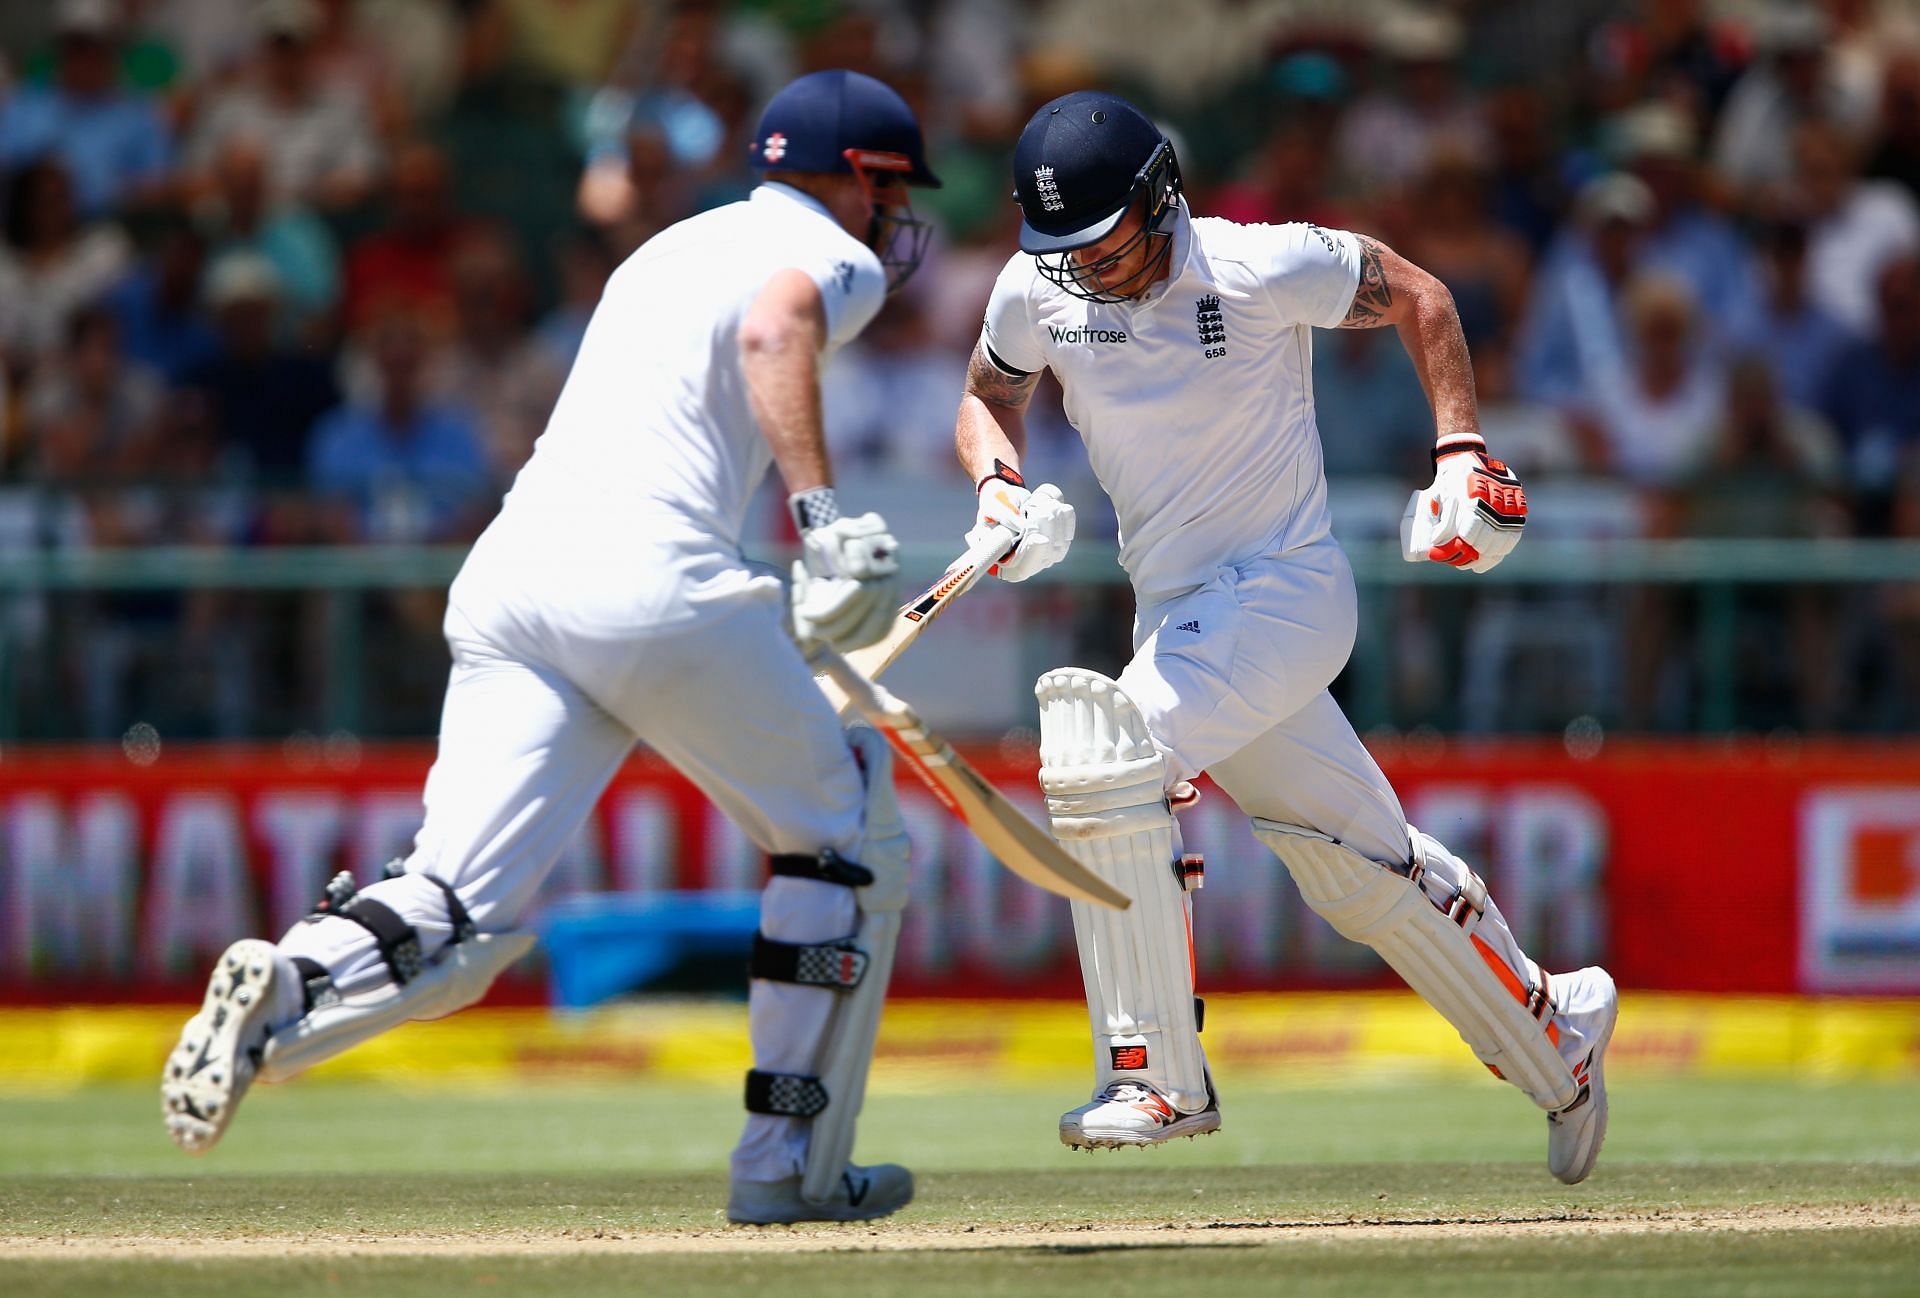 South Africa v England - Second Test: Day Two